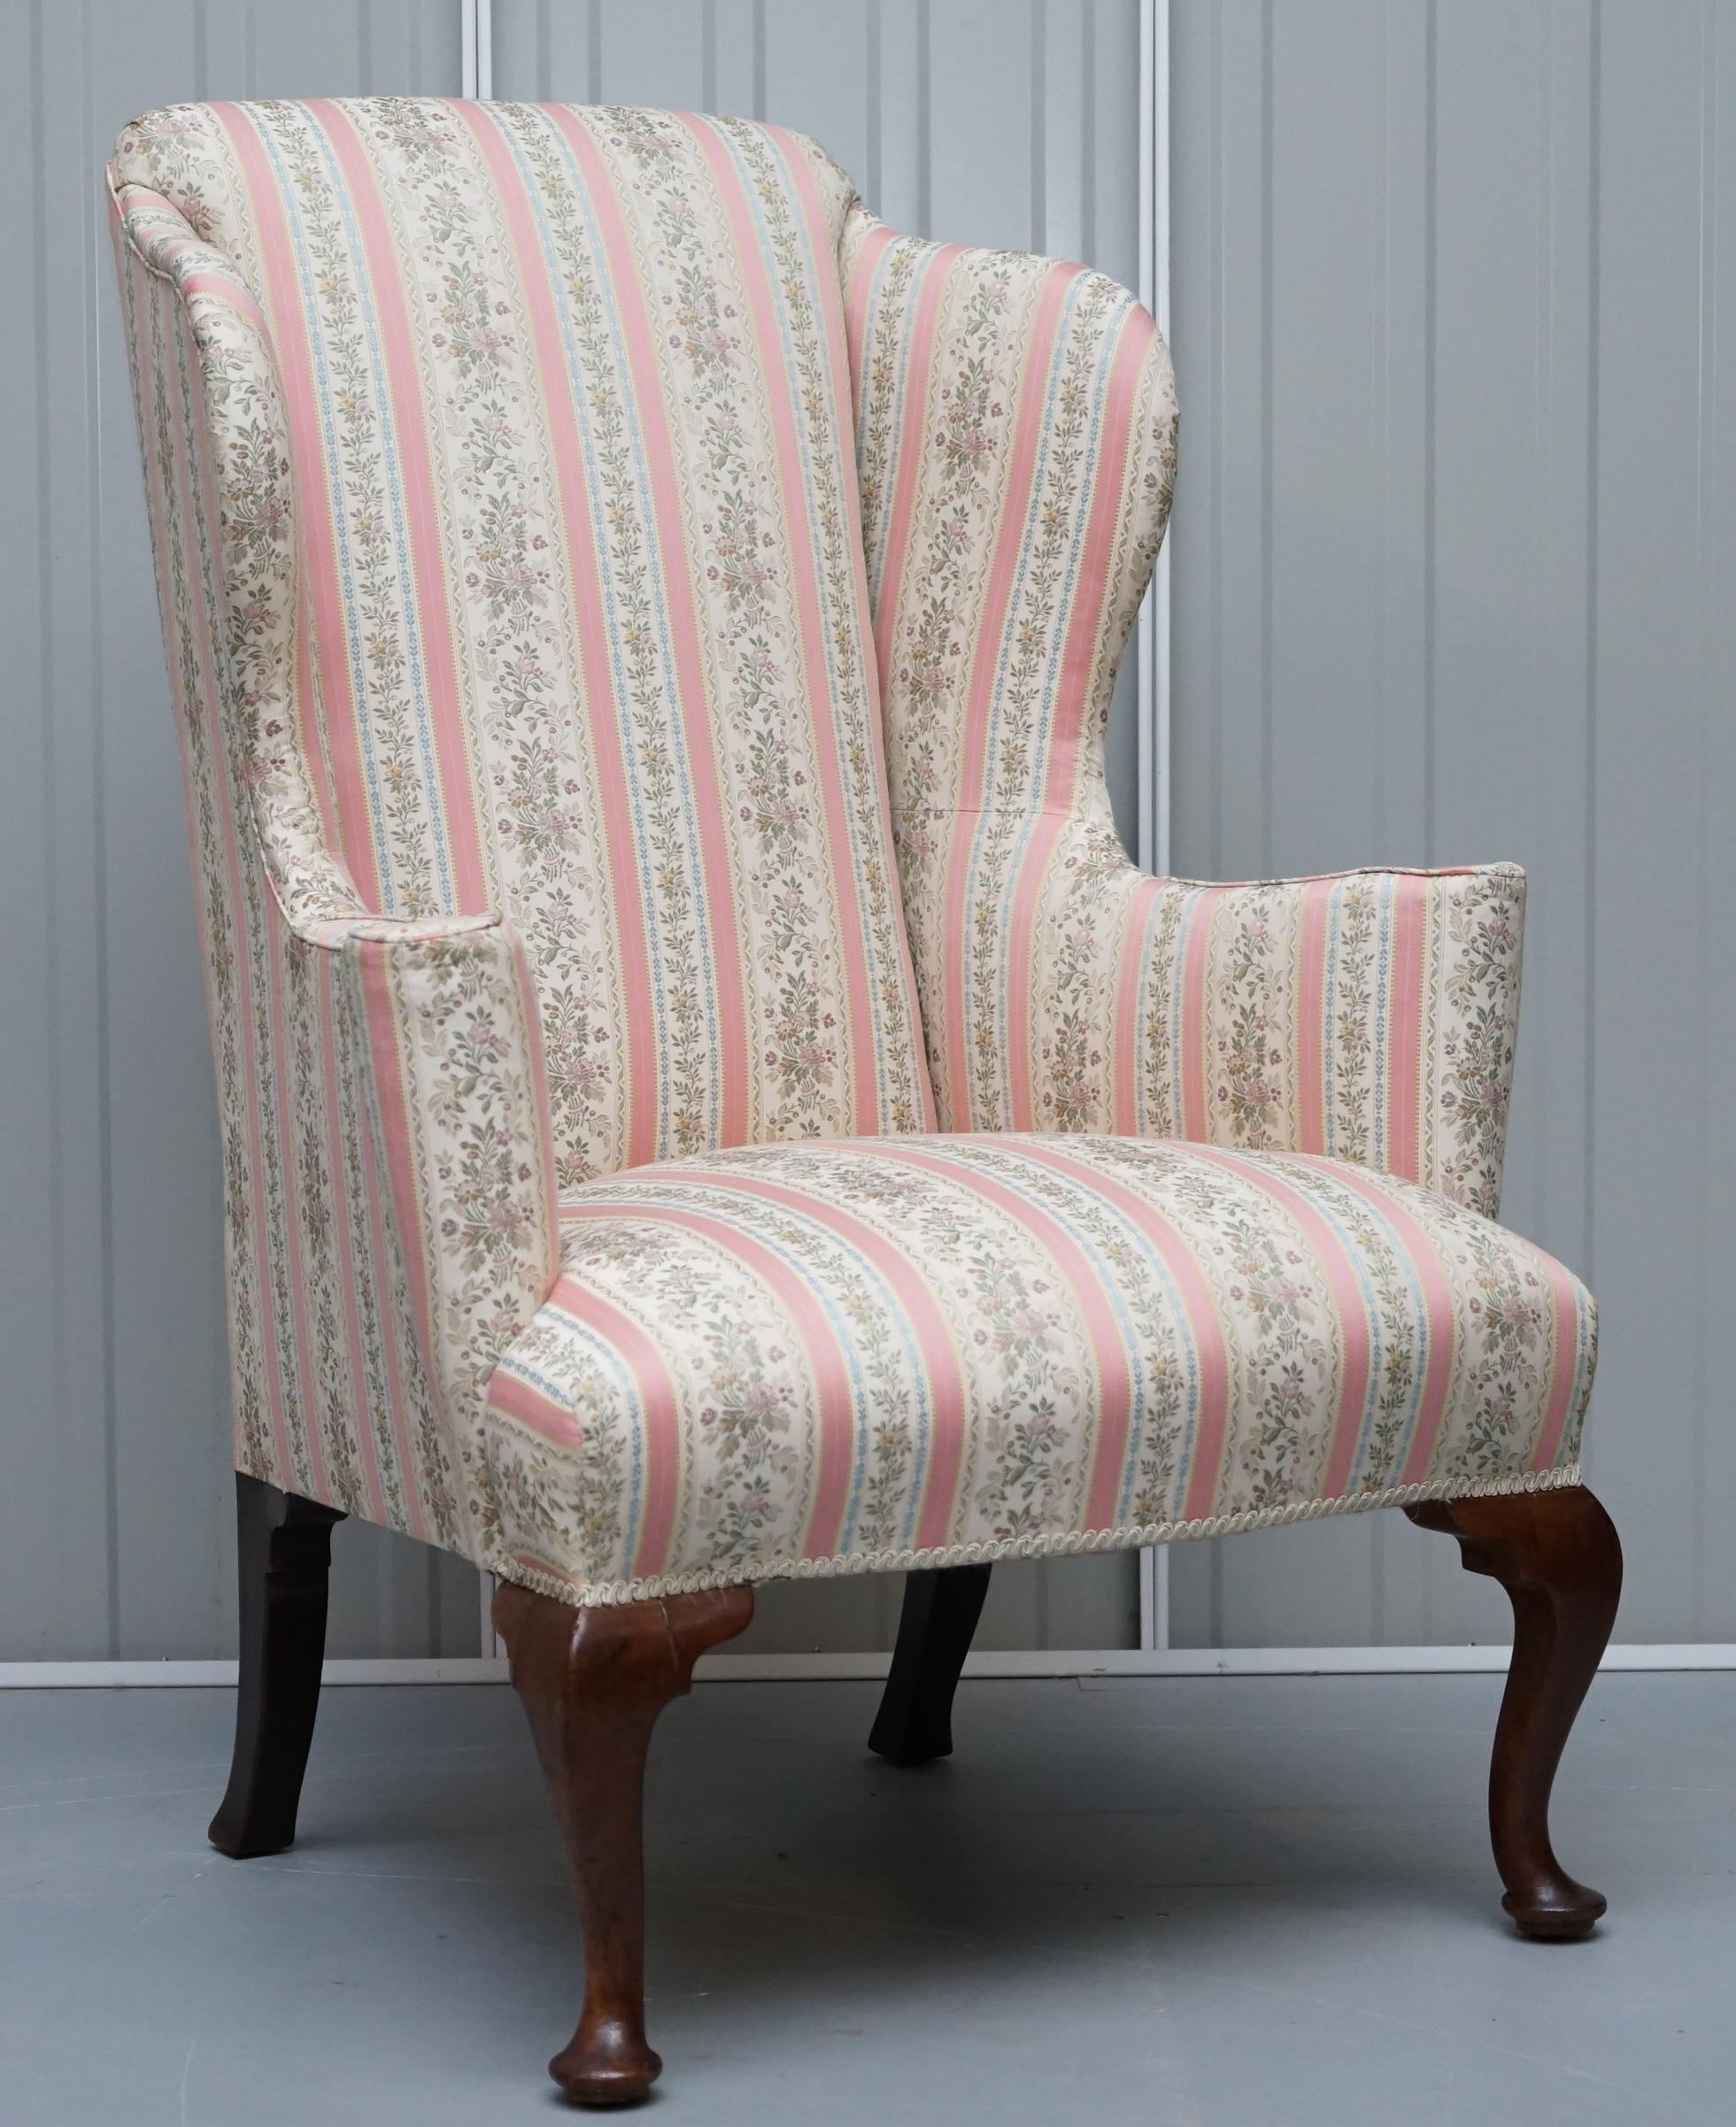 Wimbledon-Furniture

Wimbledon-Furniture is delighted to offer for sale this stunning exceptionally rare original Victorian Howard & Son’s Berners street fully restored wingback armchair

Please note the delivery fee listed is just a guide, it